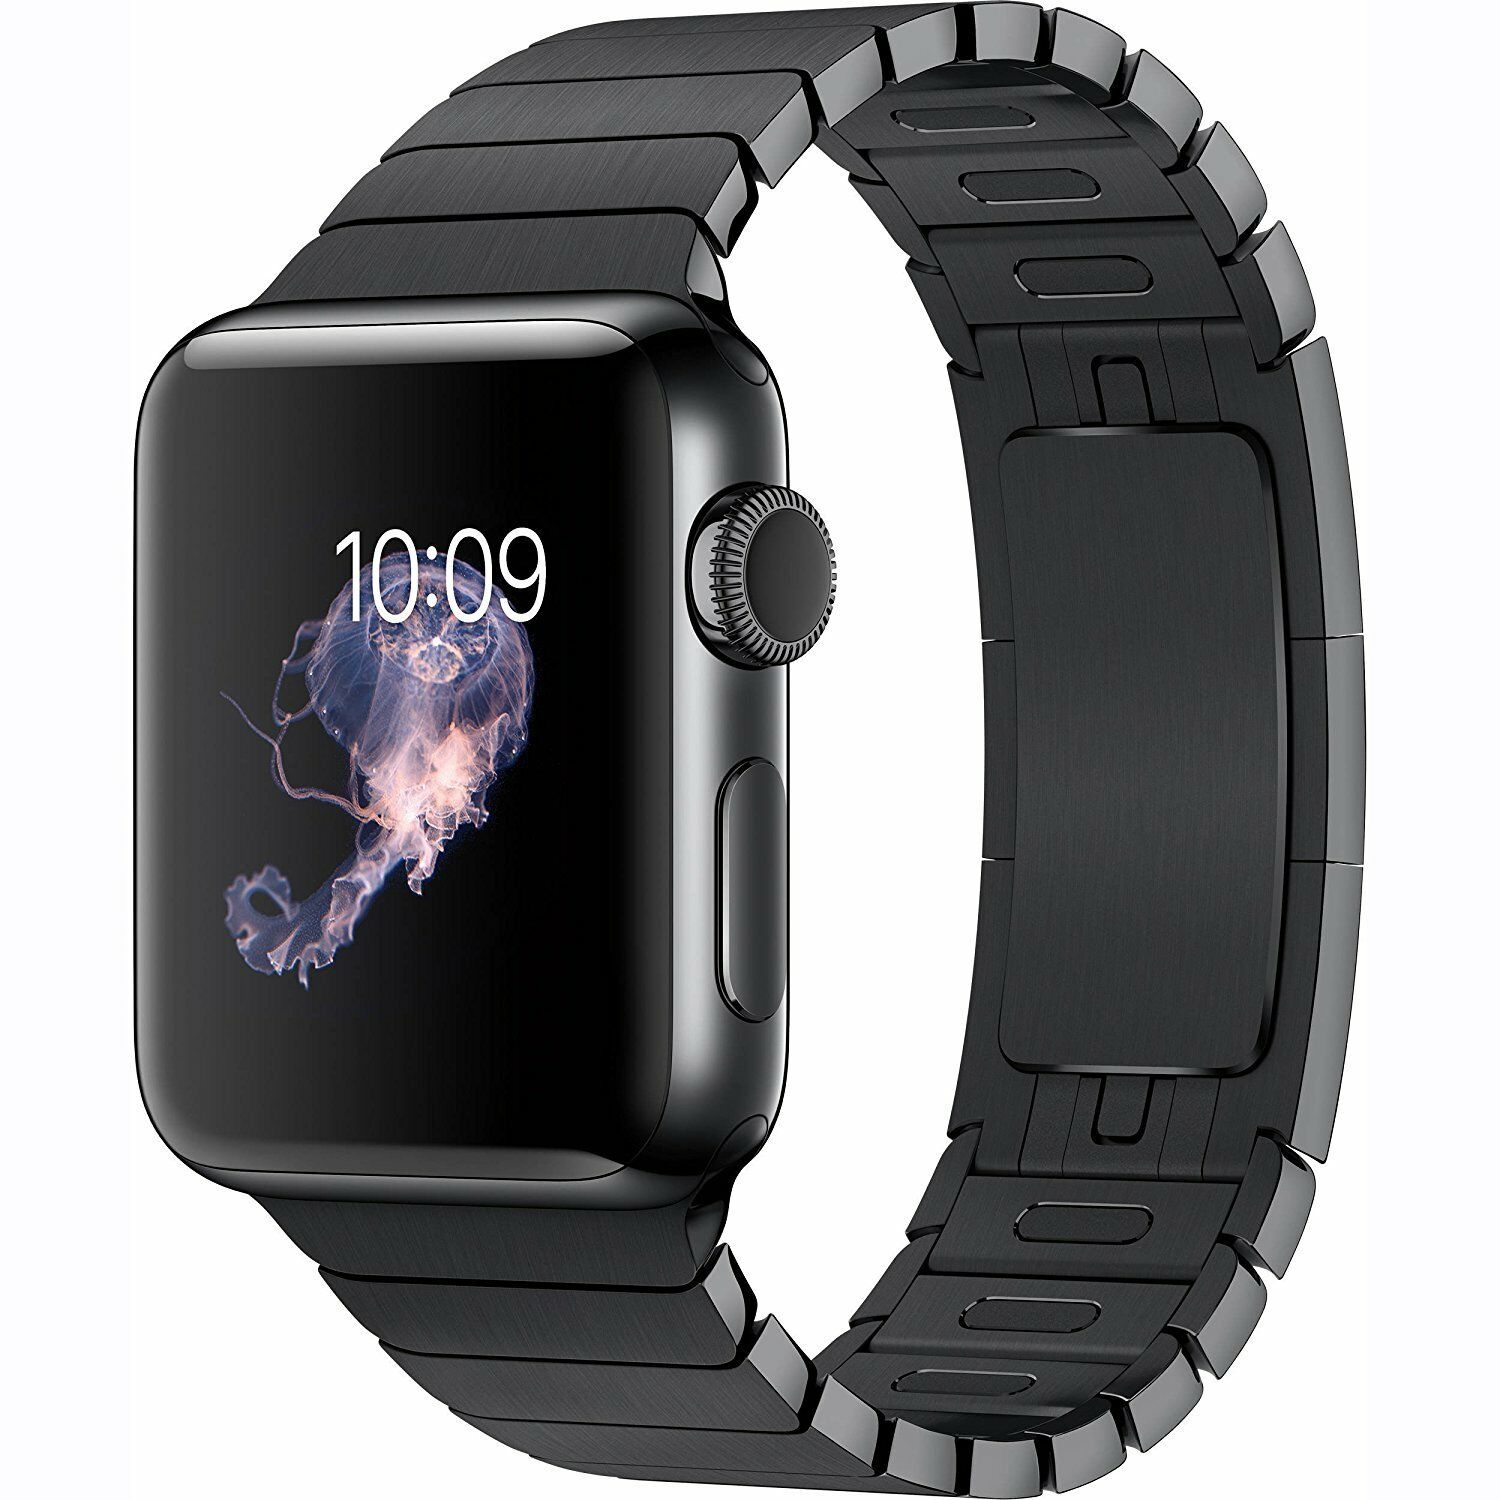 Apple Watch Series 2 38mm Smartwatch (Space Black Stainless Steel Case, Space Black Link Band) with 2 Year Extended Warranty